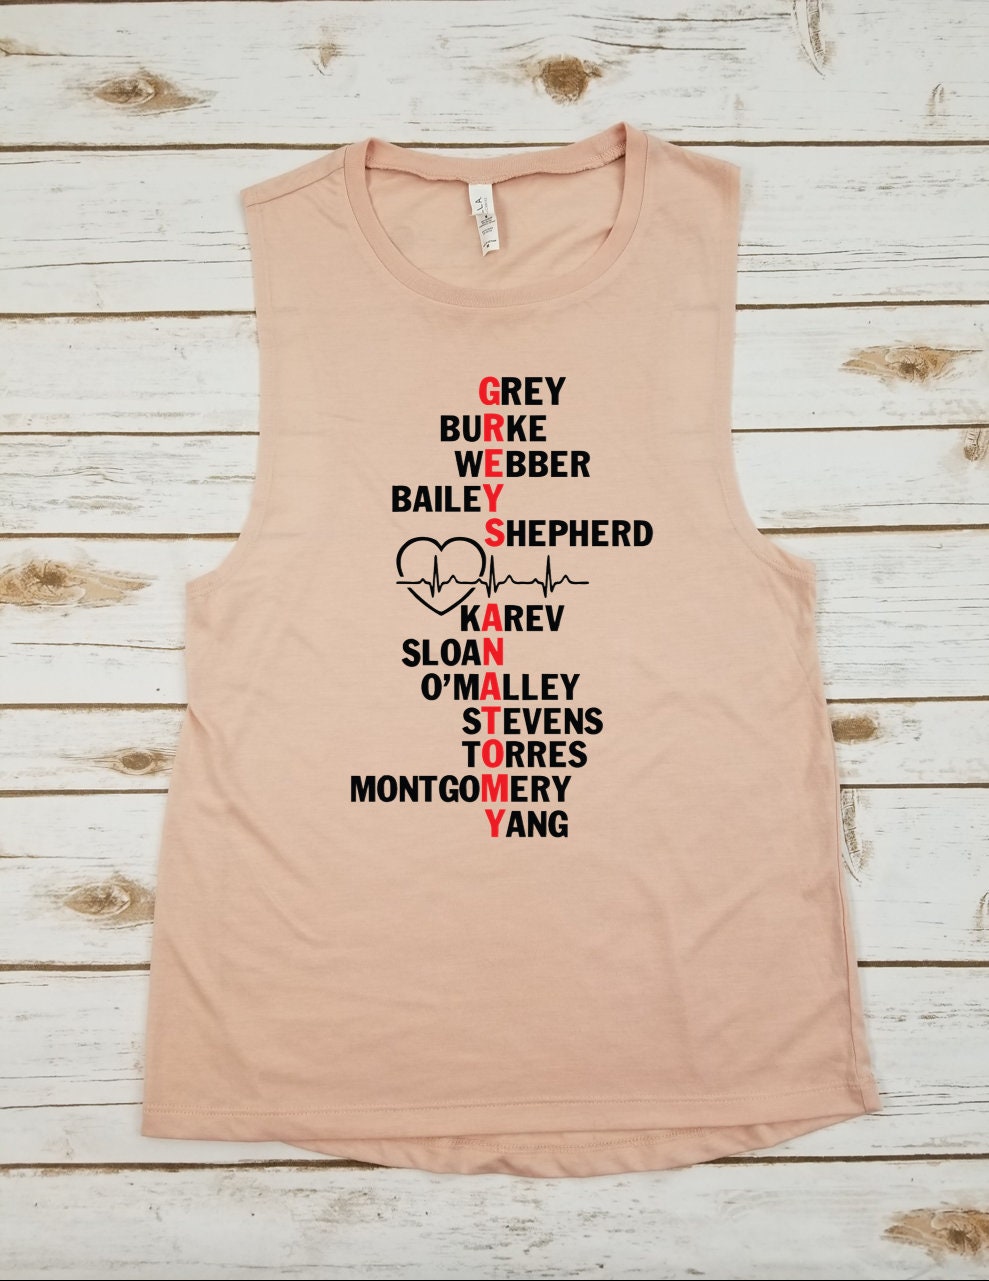 Grey's Anatomy cast names womens muscle tank. Grey's | Etsy